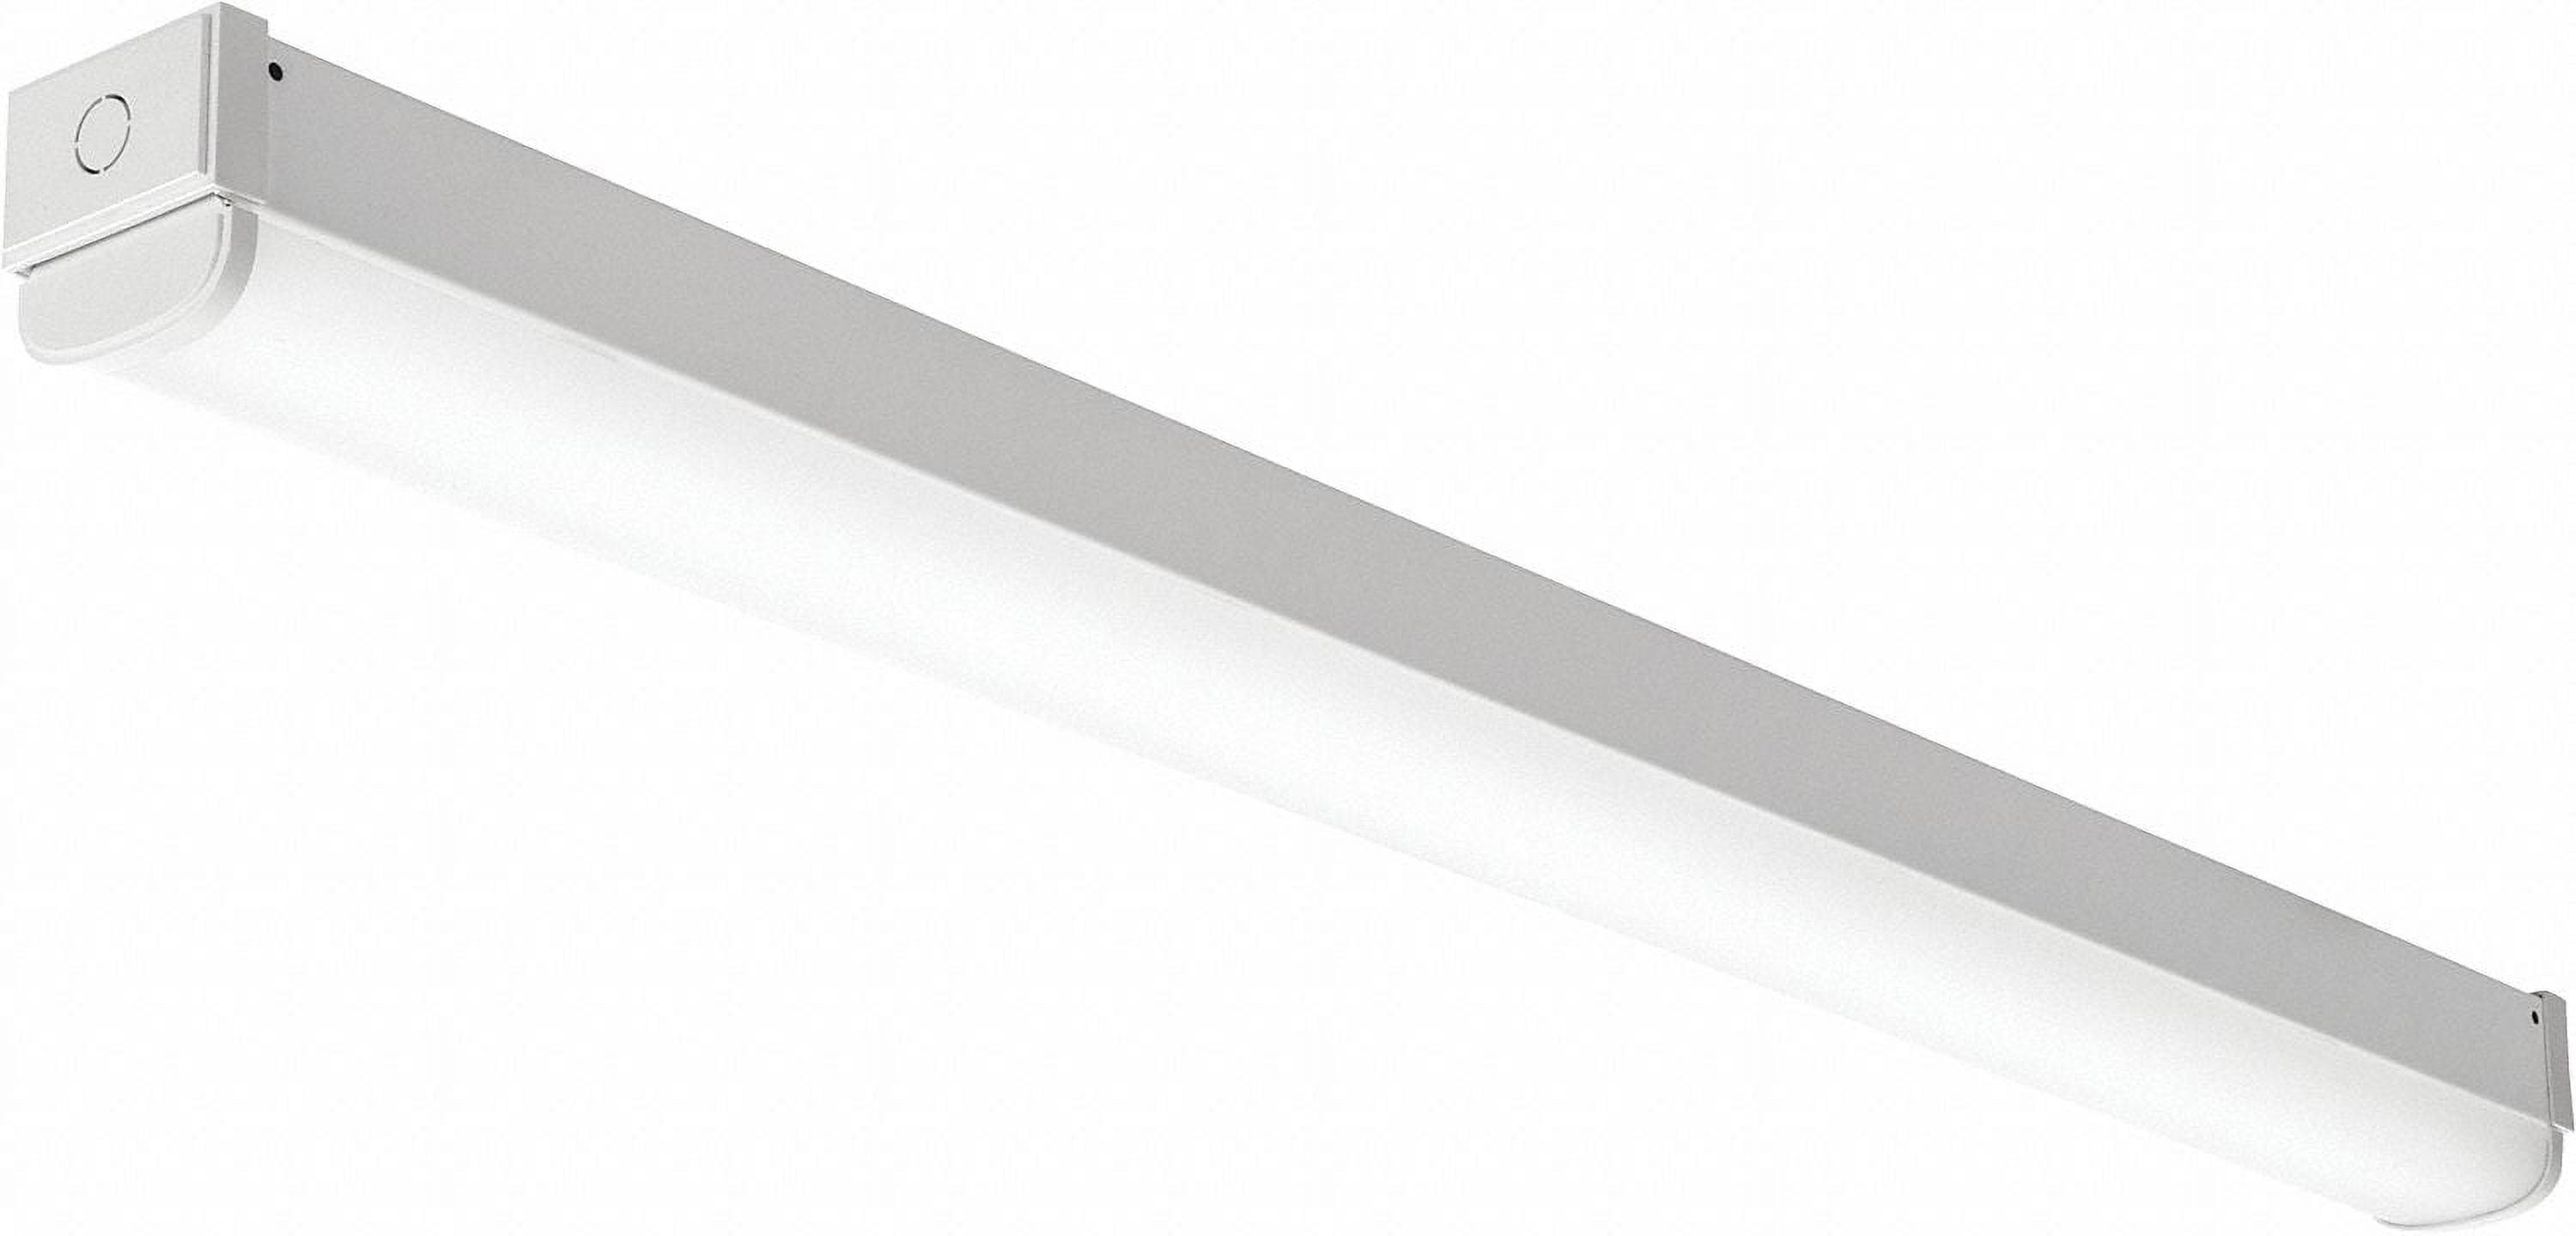 EcoBright 4' Round Lens LED Linear Strip Light, 4000K, Dimmable